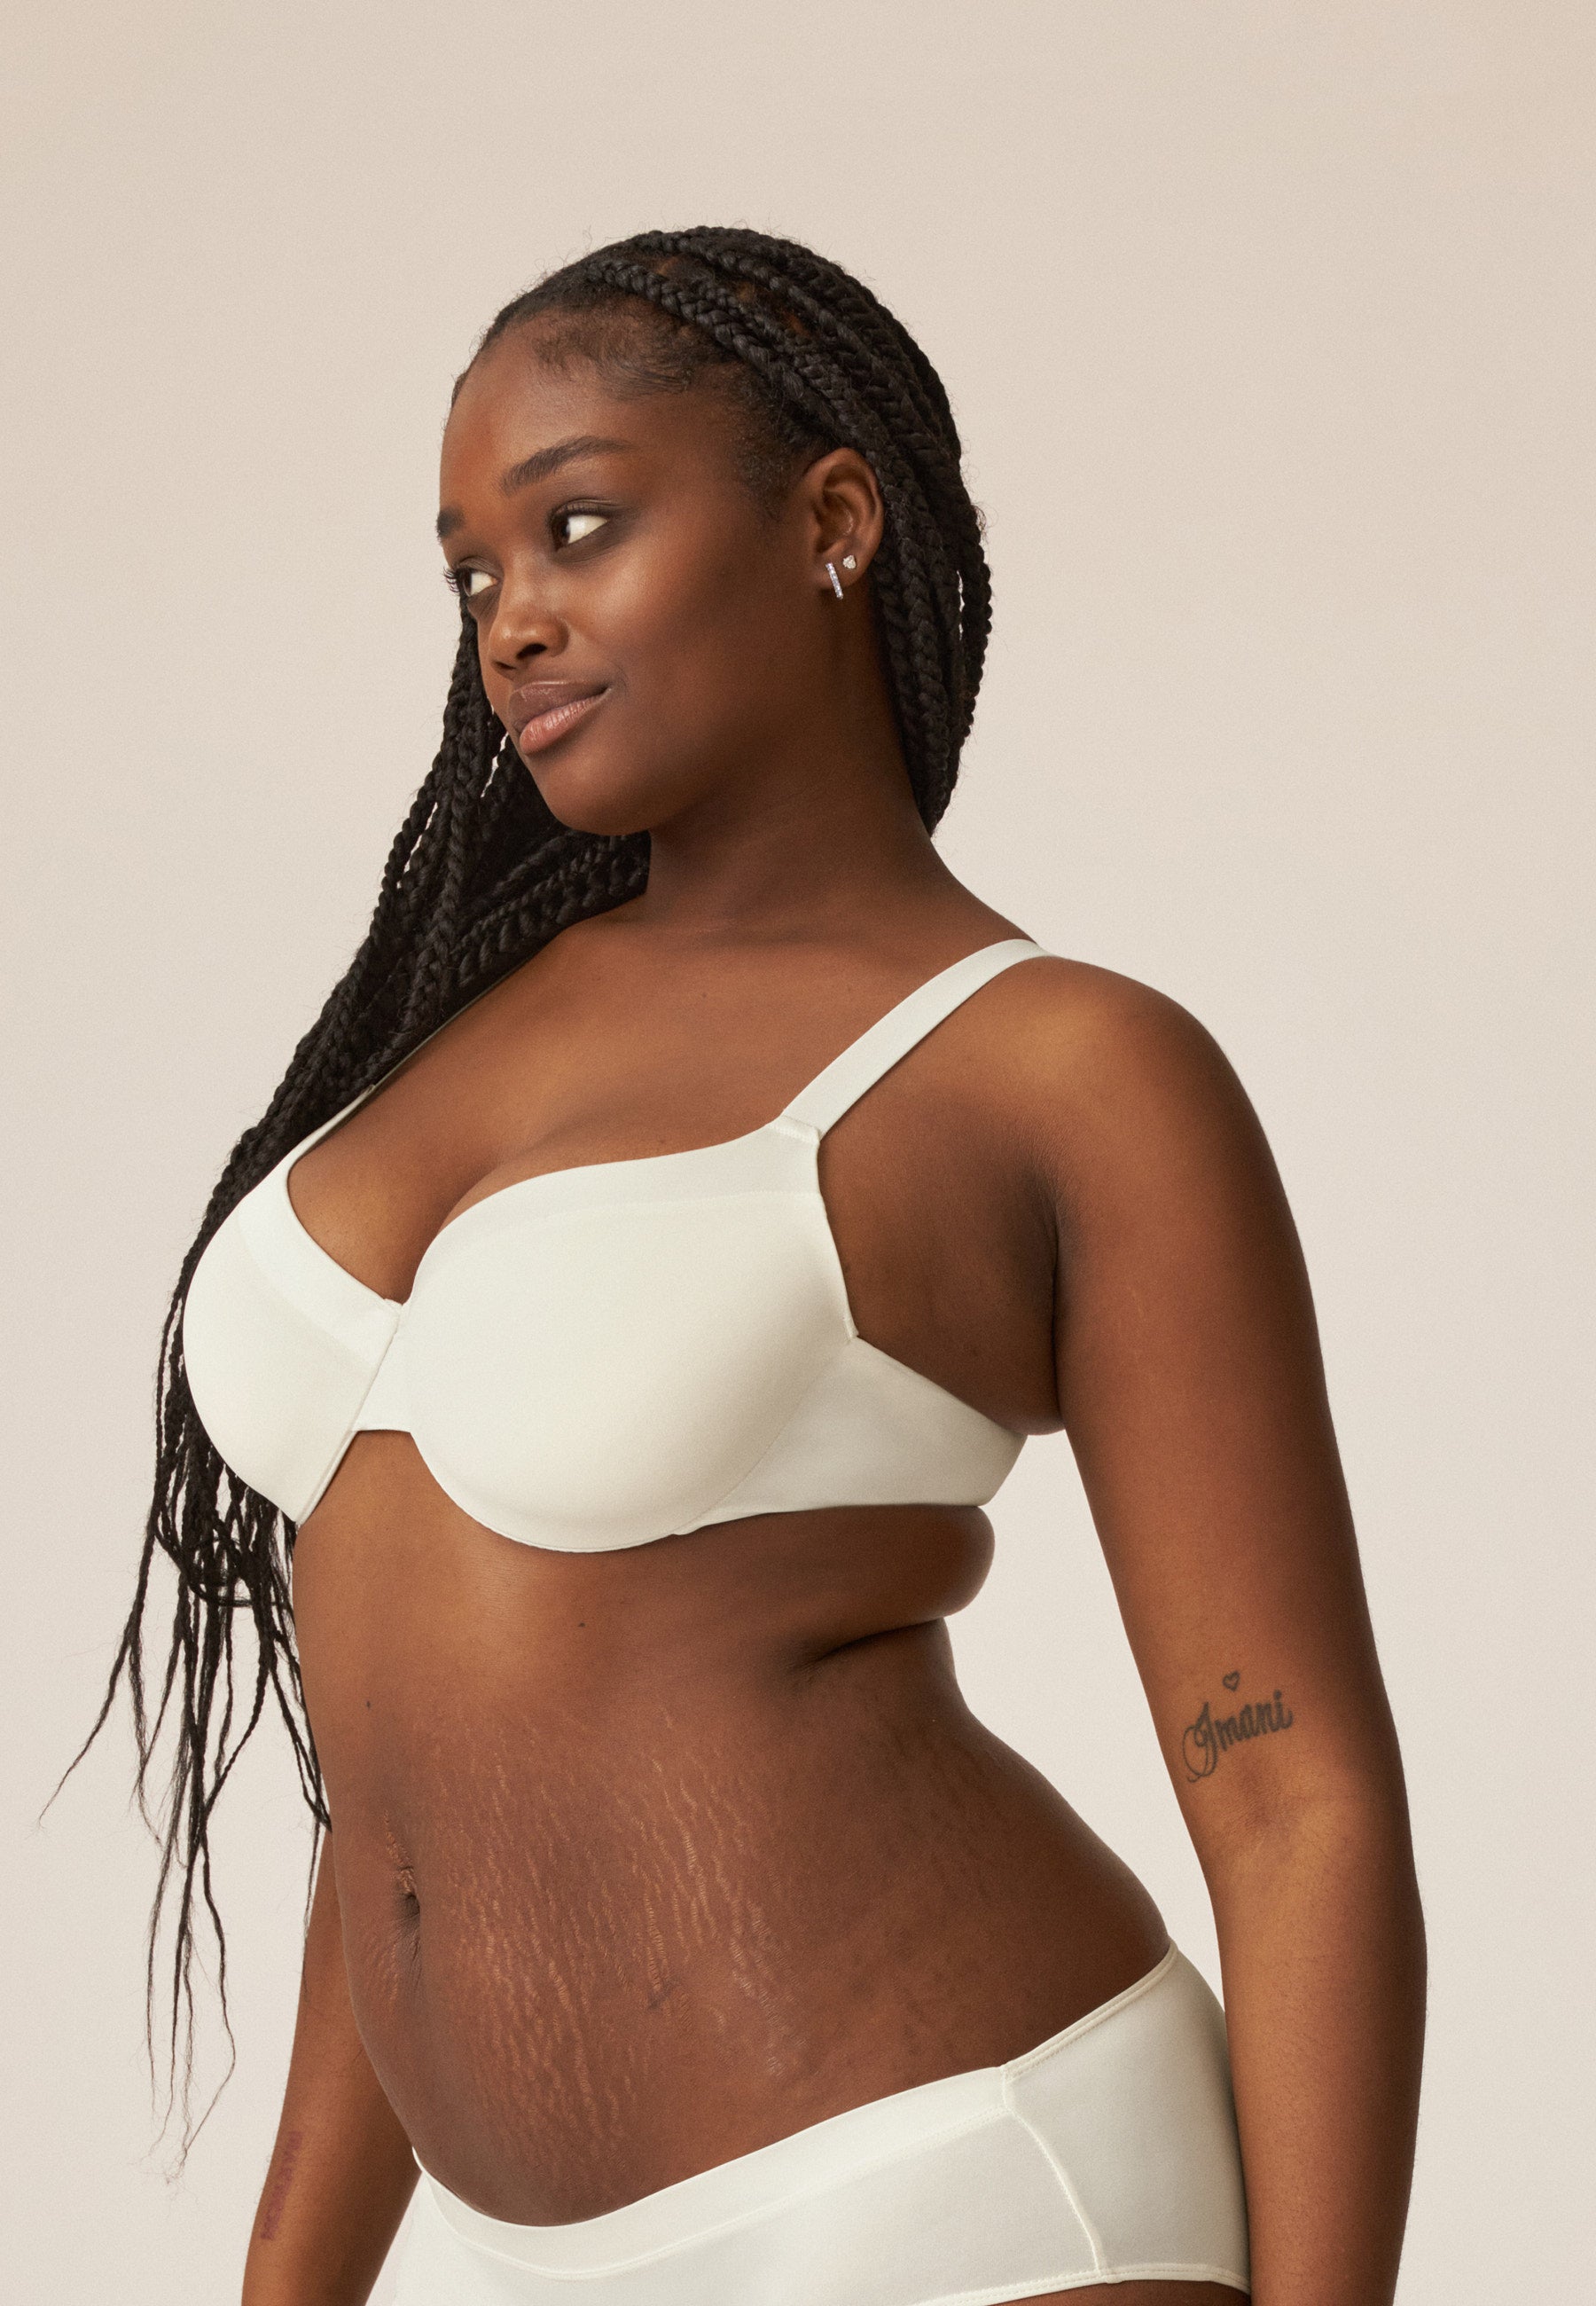 LE RUSÉ - Bra attached in front without underwire – Boutique Intimoda